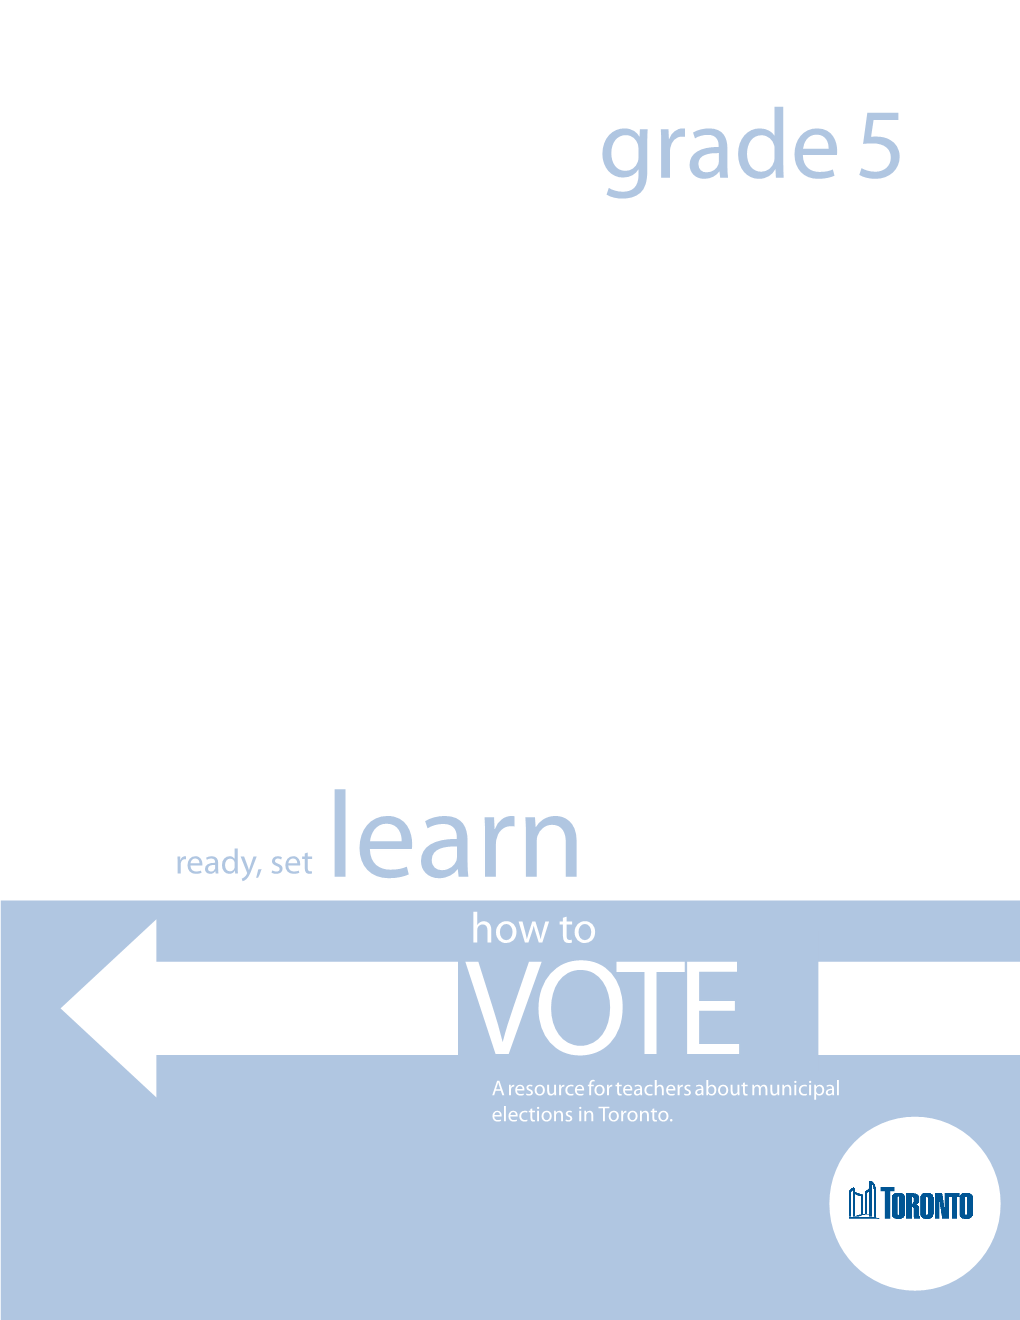 Ready Set Learn How to Vote: a Resource for Teachers About Municipal Elections in Toronto